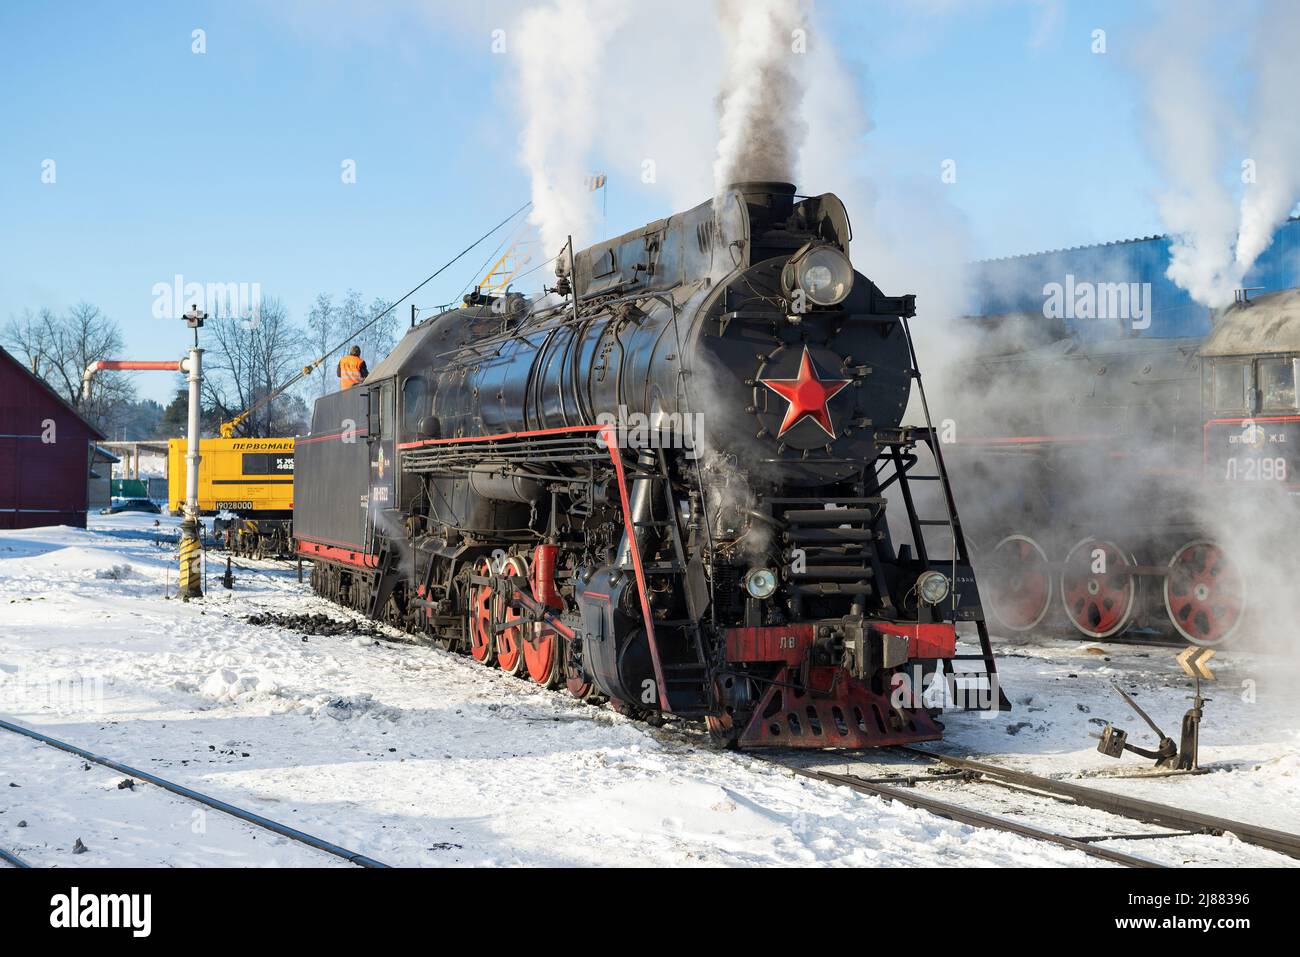 SORTAVALA, RUSSIA - MARCH 10, 2021: The last working Soviet steam locomotive of the 'LV' series at the Sortavala station on a sunny March morning Stock Photo